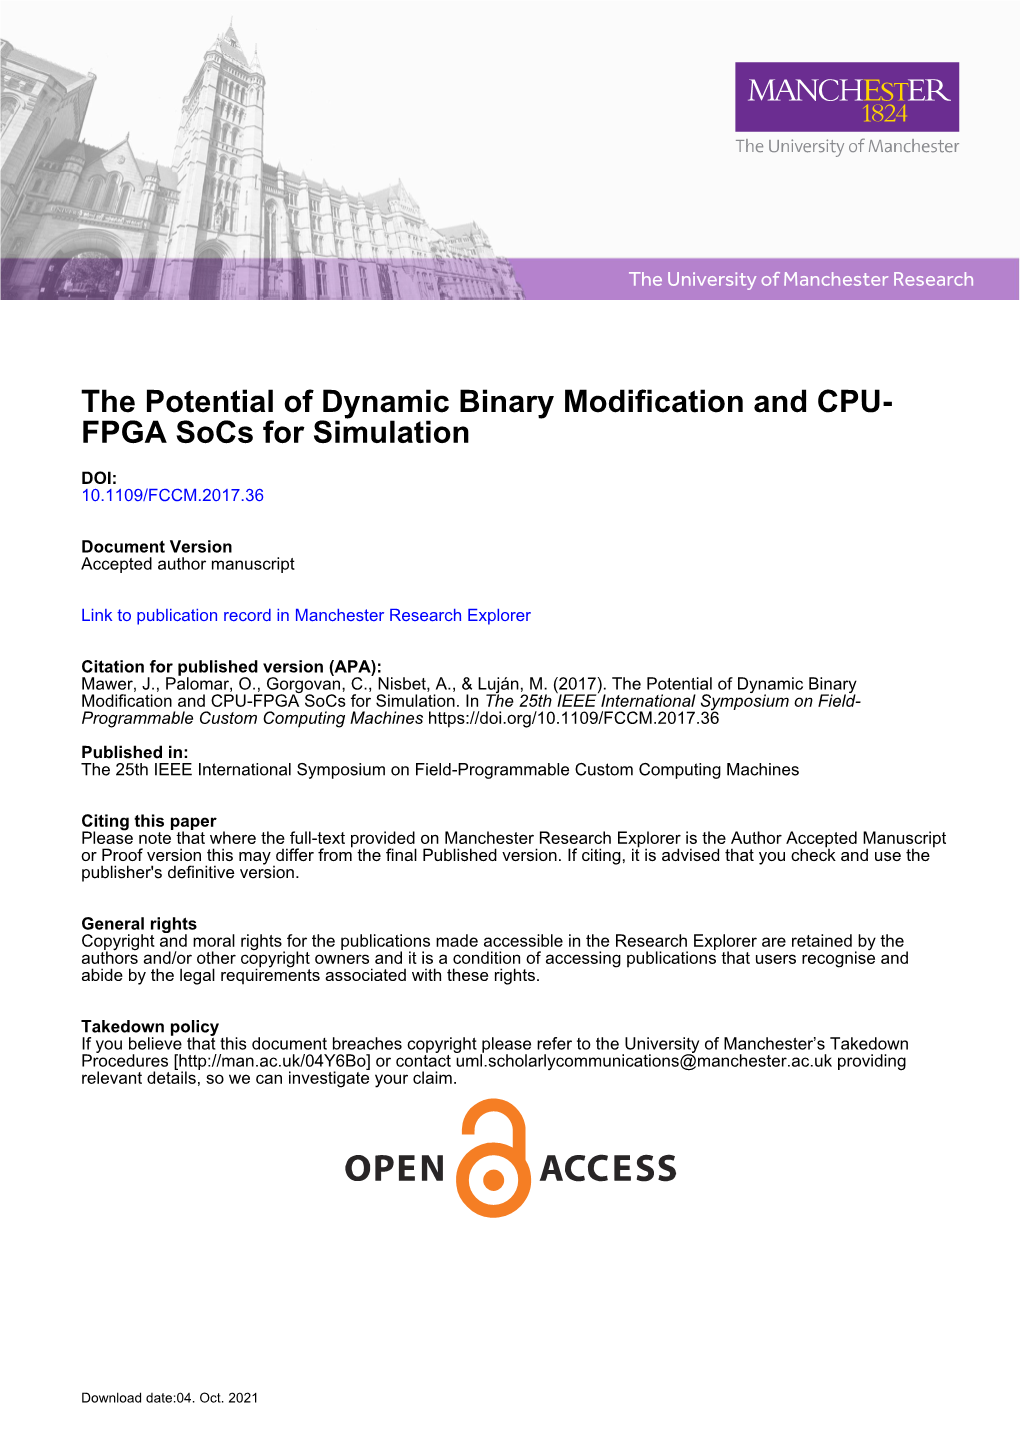 The Potential of Dynamic Binary Modification and CPU- FPGA Socs for Simulation